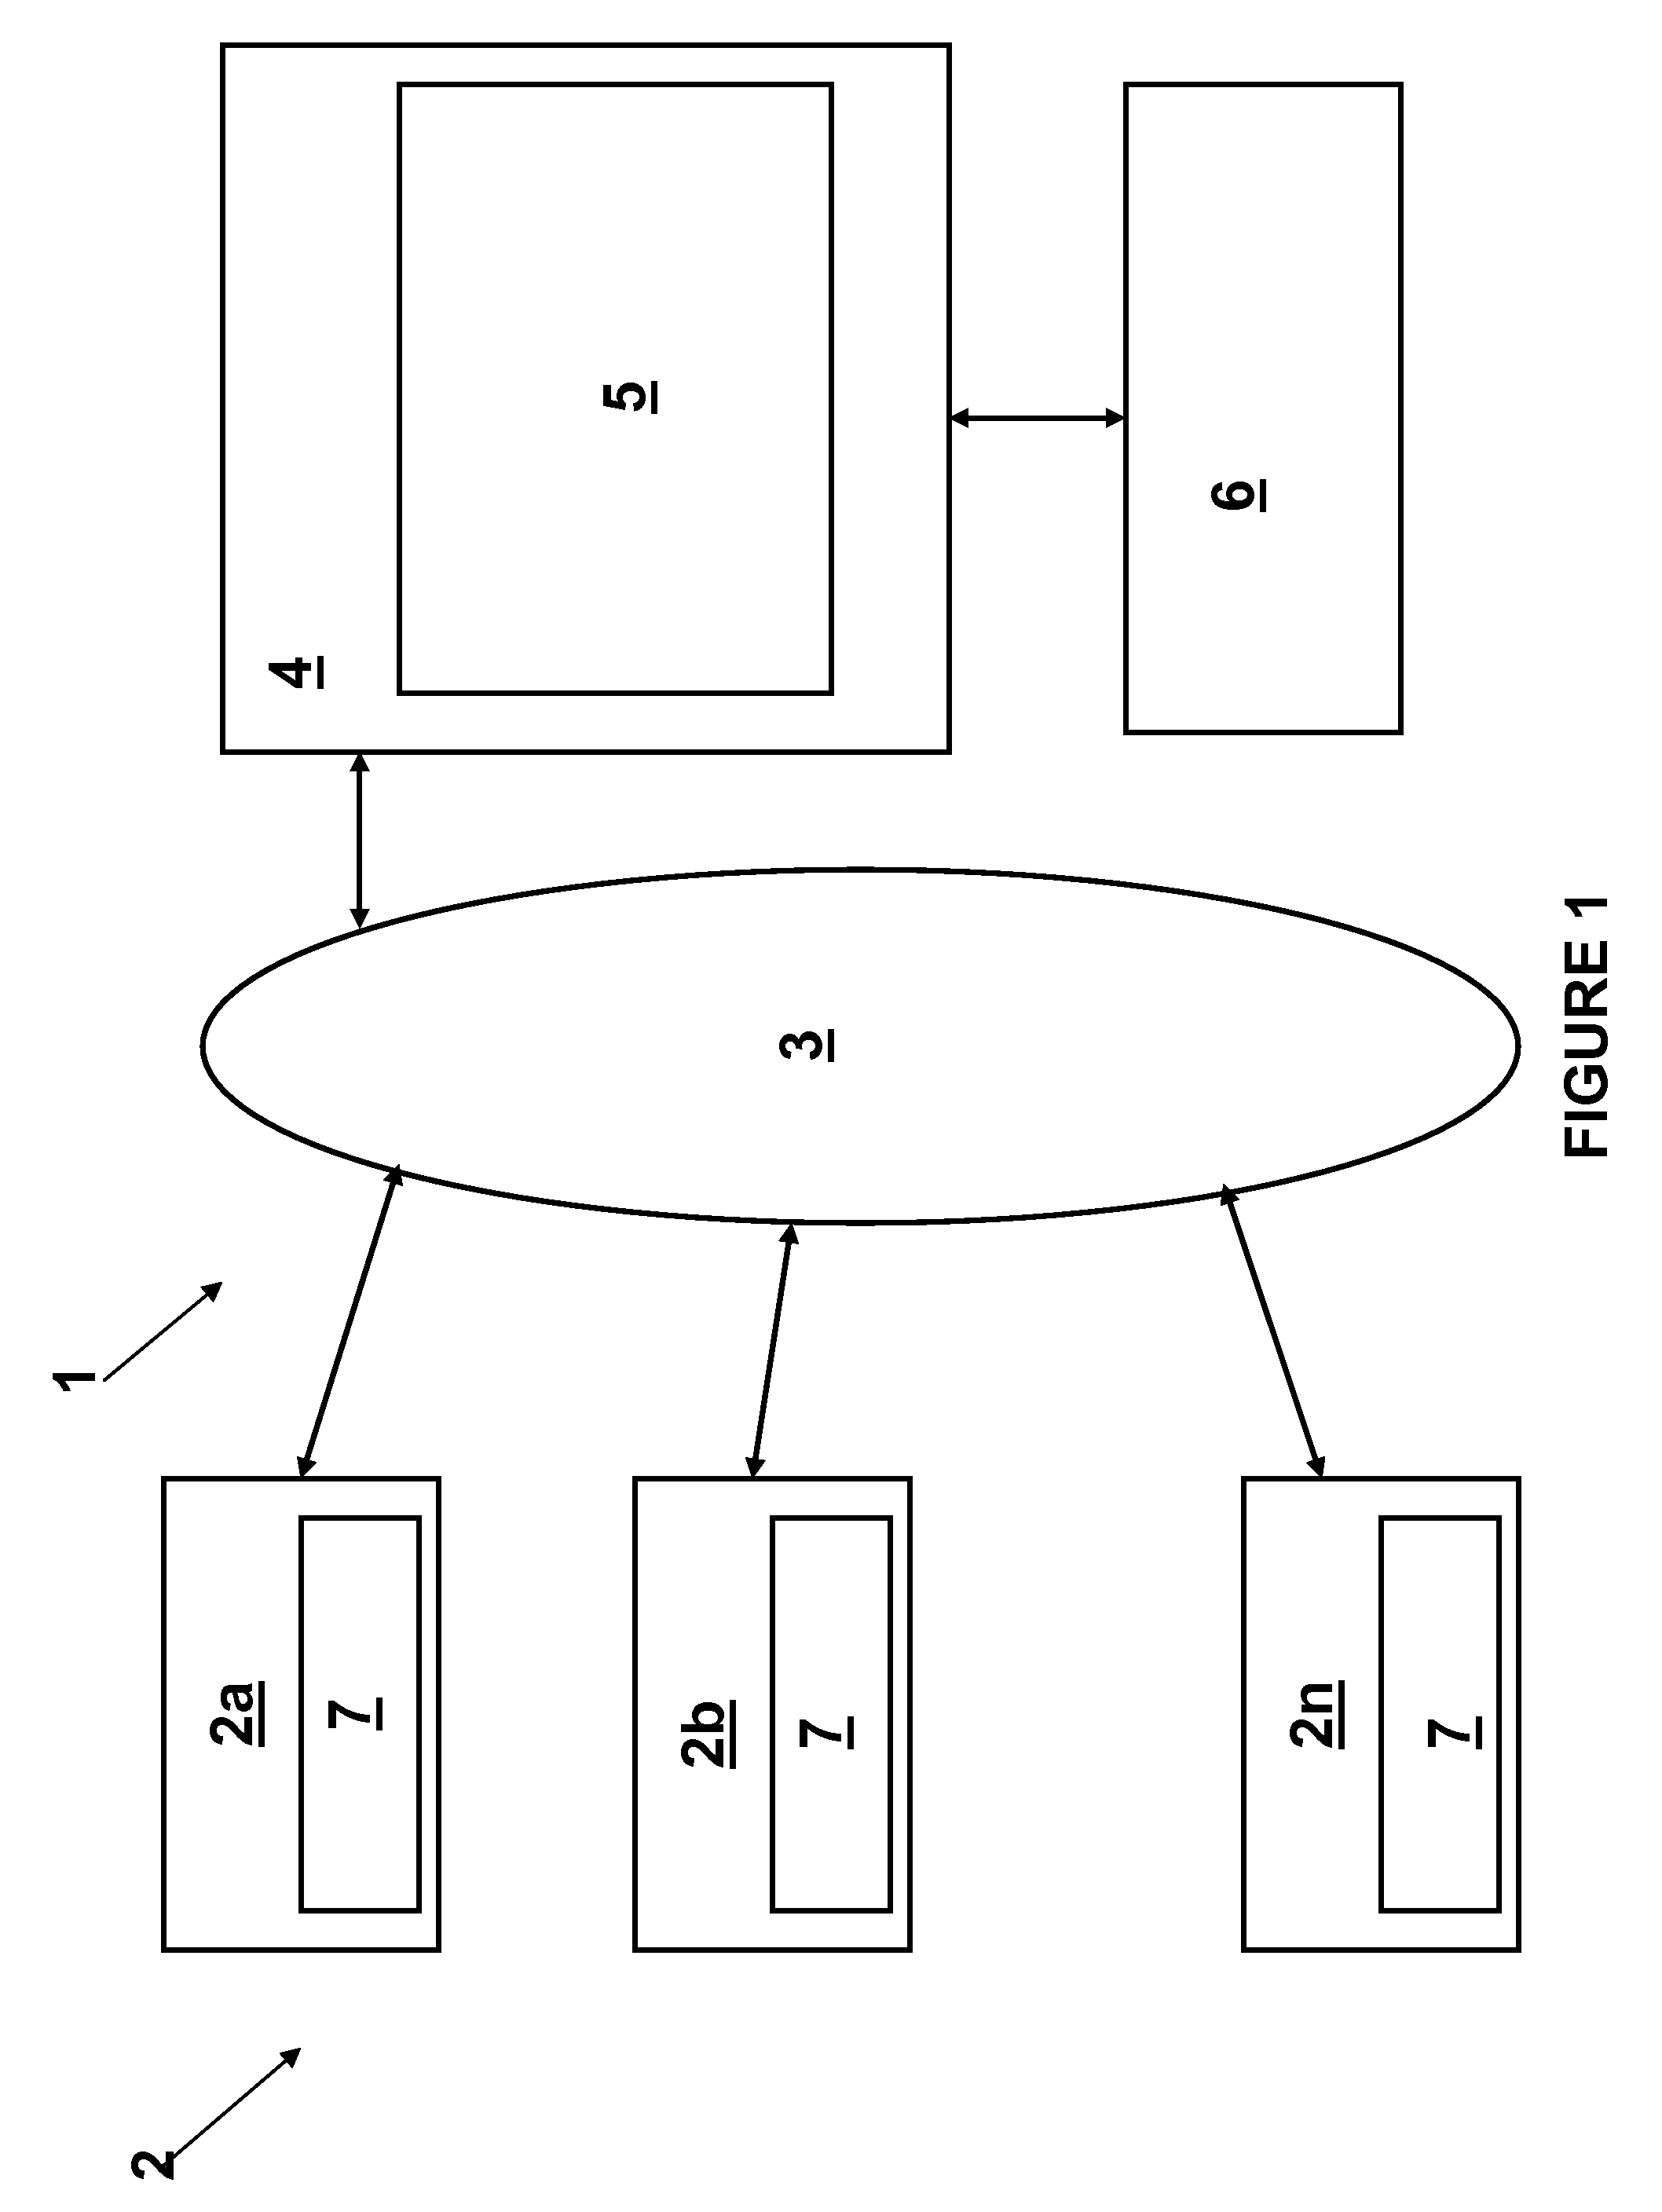 Method and system to model and create a virtual private datacenter